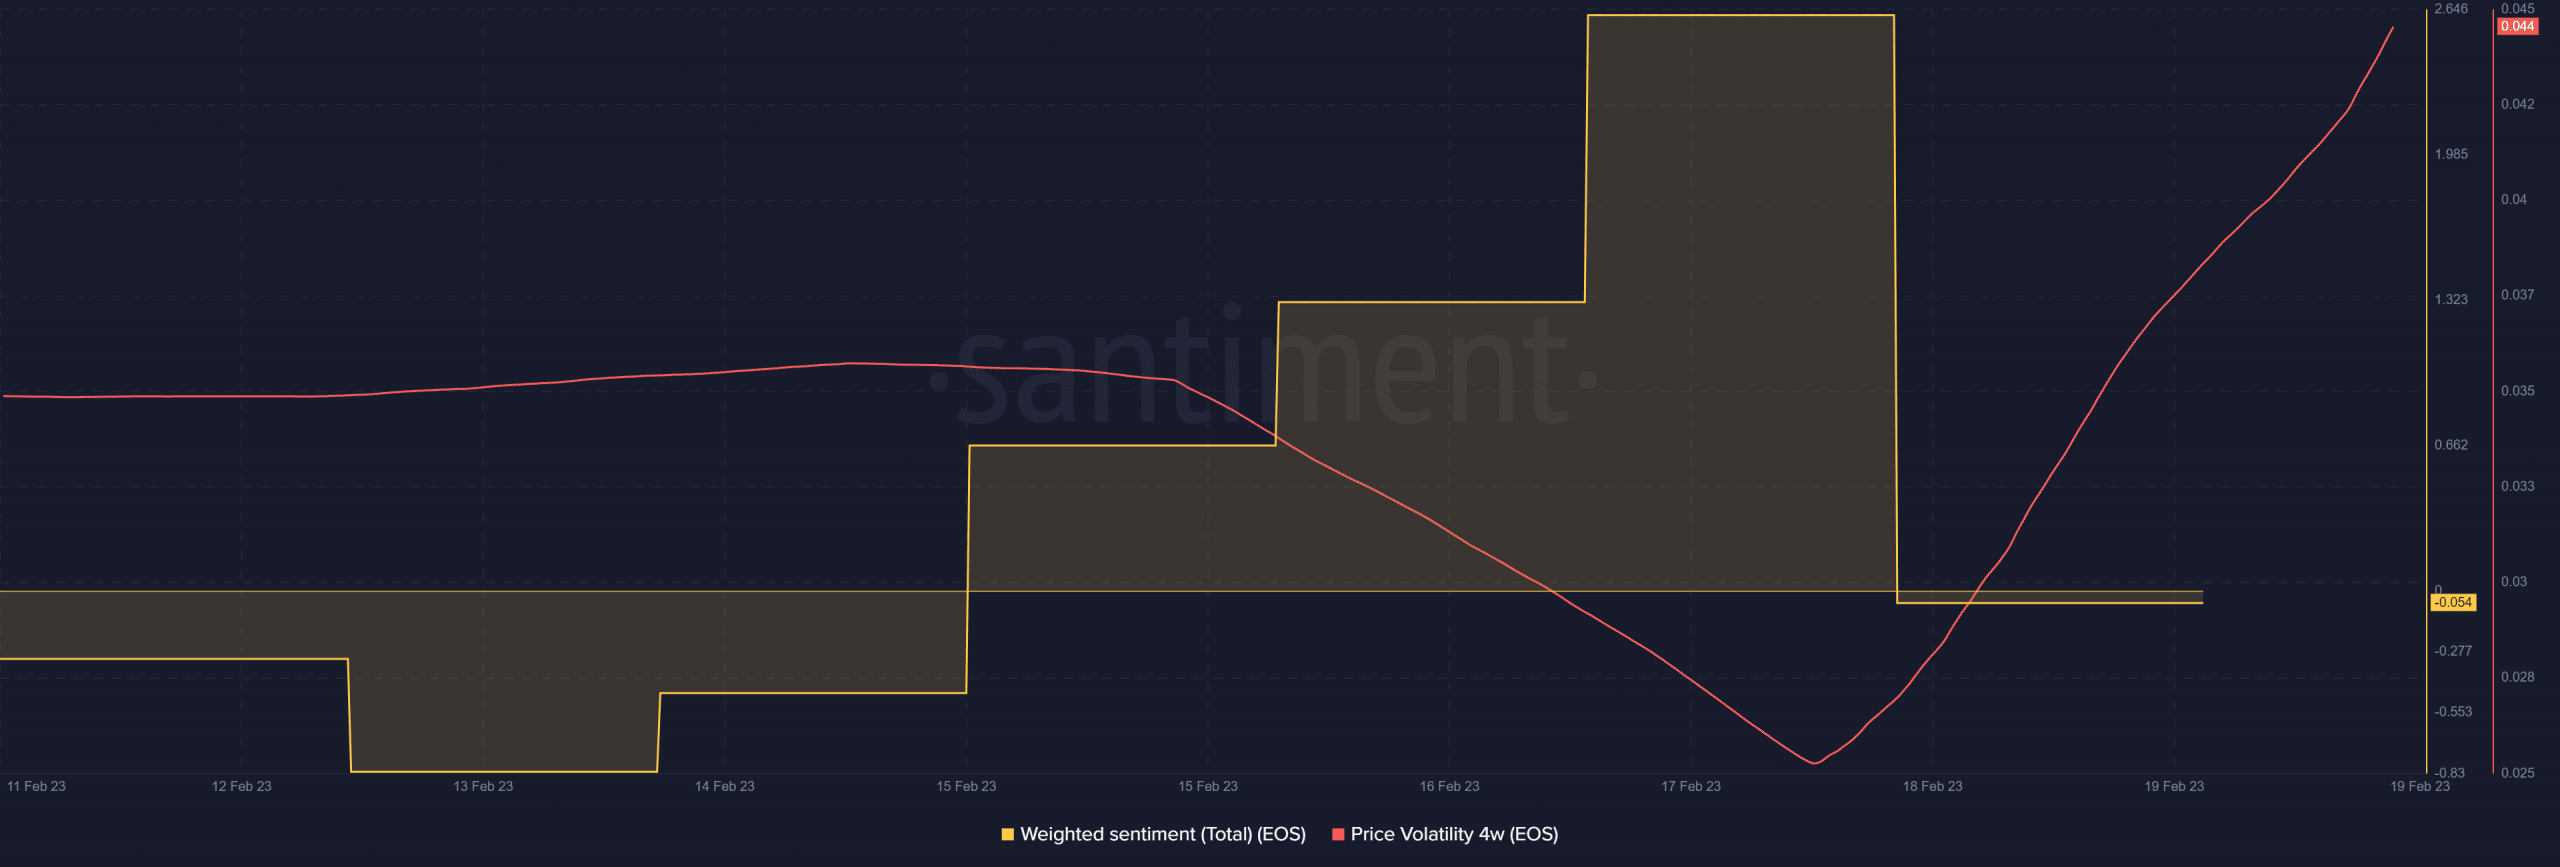 EOS volatility and weighted sentiment